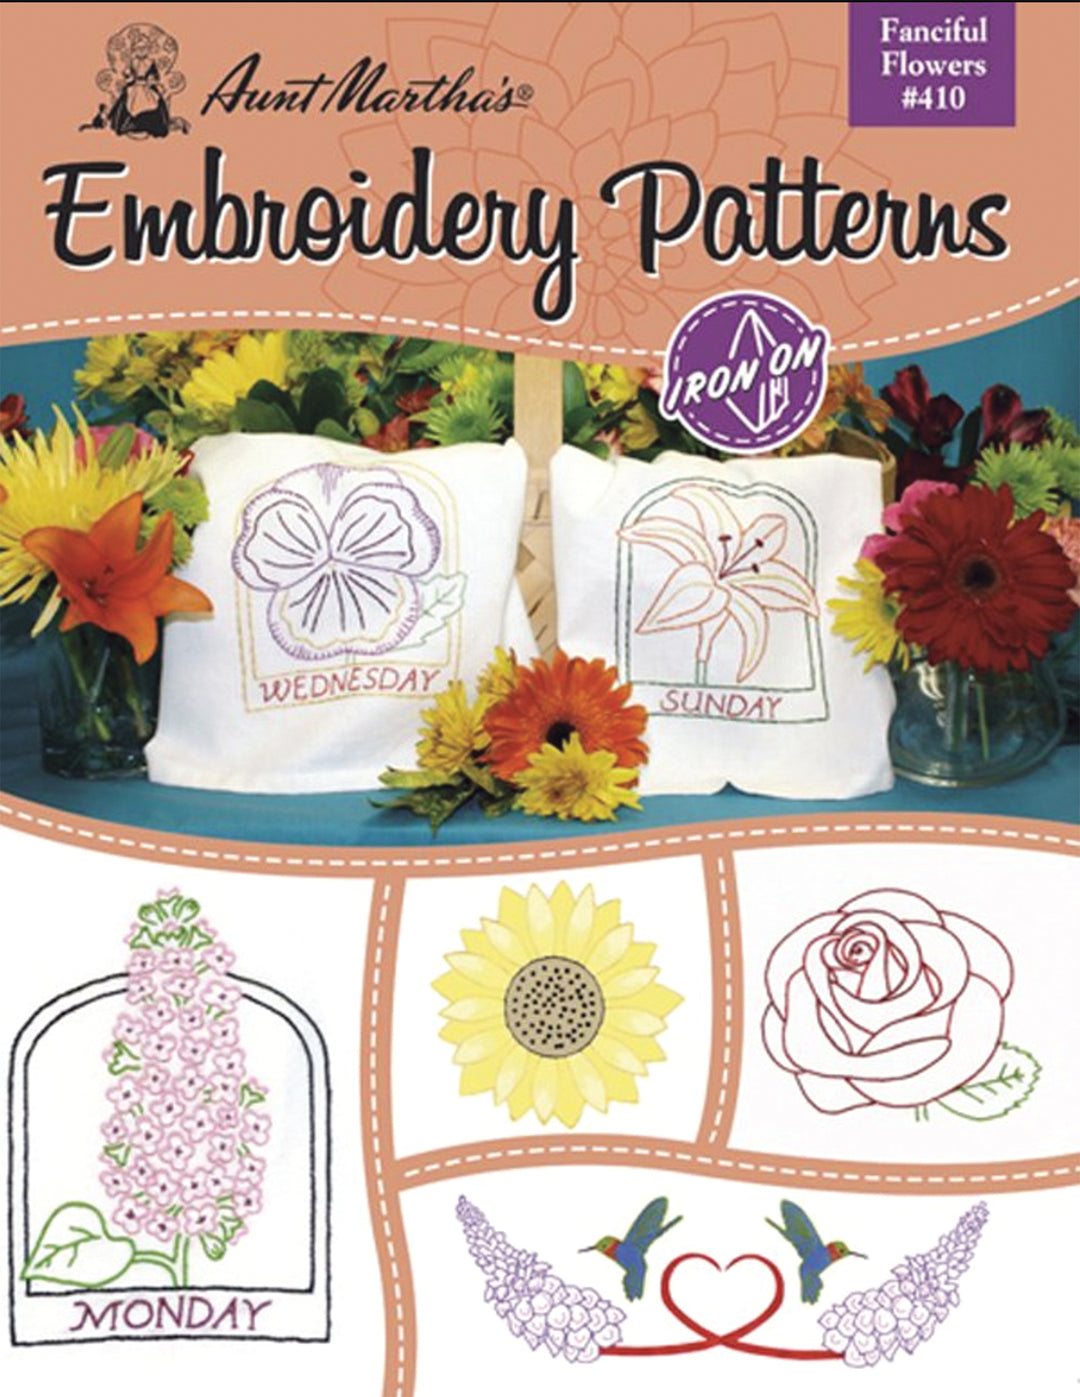 Aunt Martha's Iron on Transfer Patterns for Stitching, Embroidery or Fabric Pain